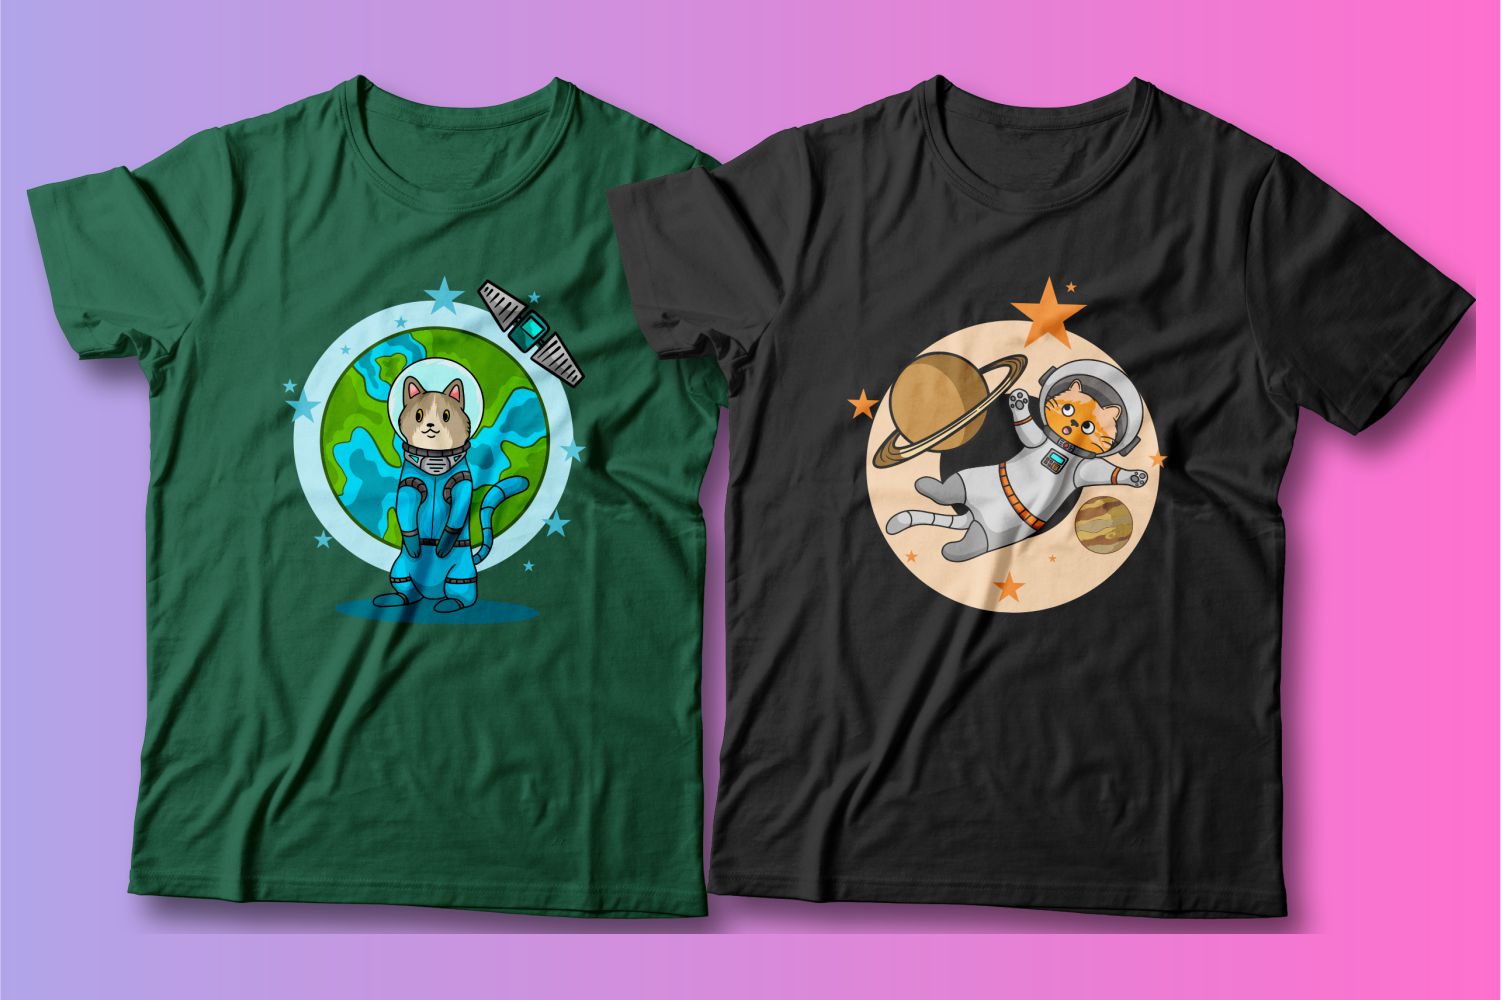 Beautiful bright graphics with cats in space on black T-shirts looks amazing.